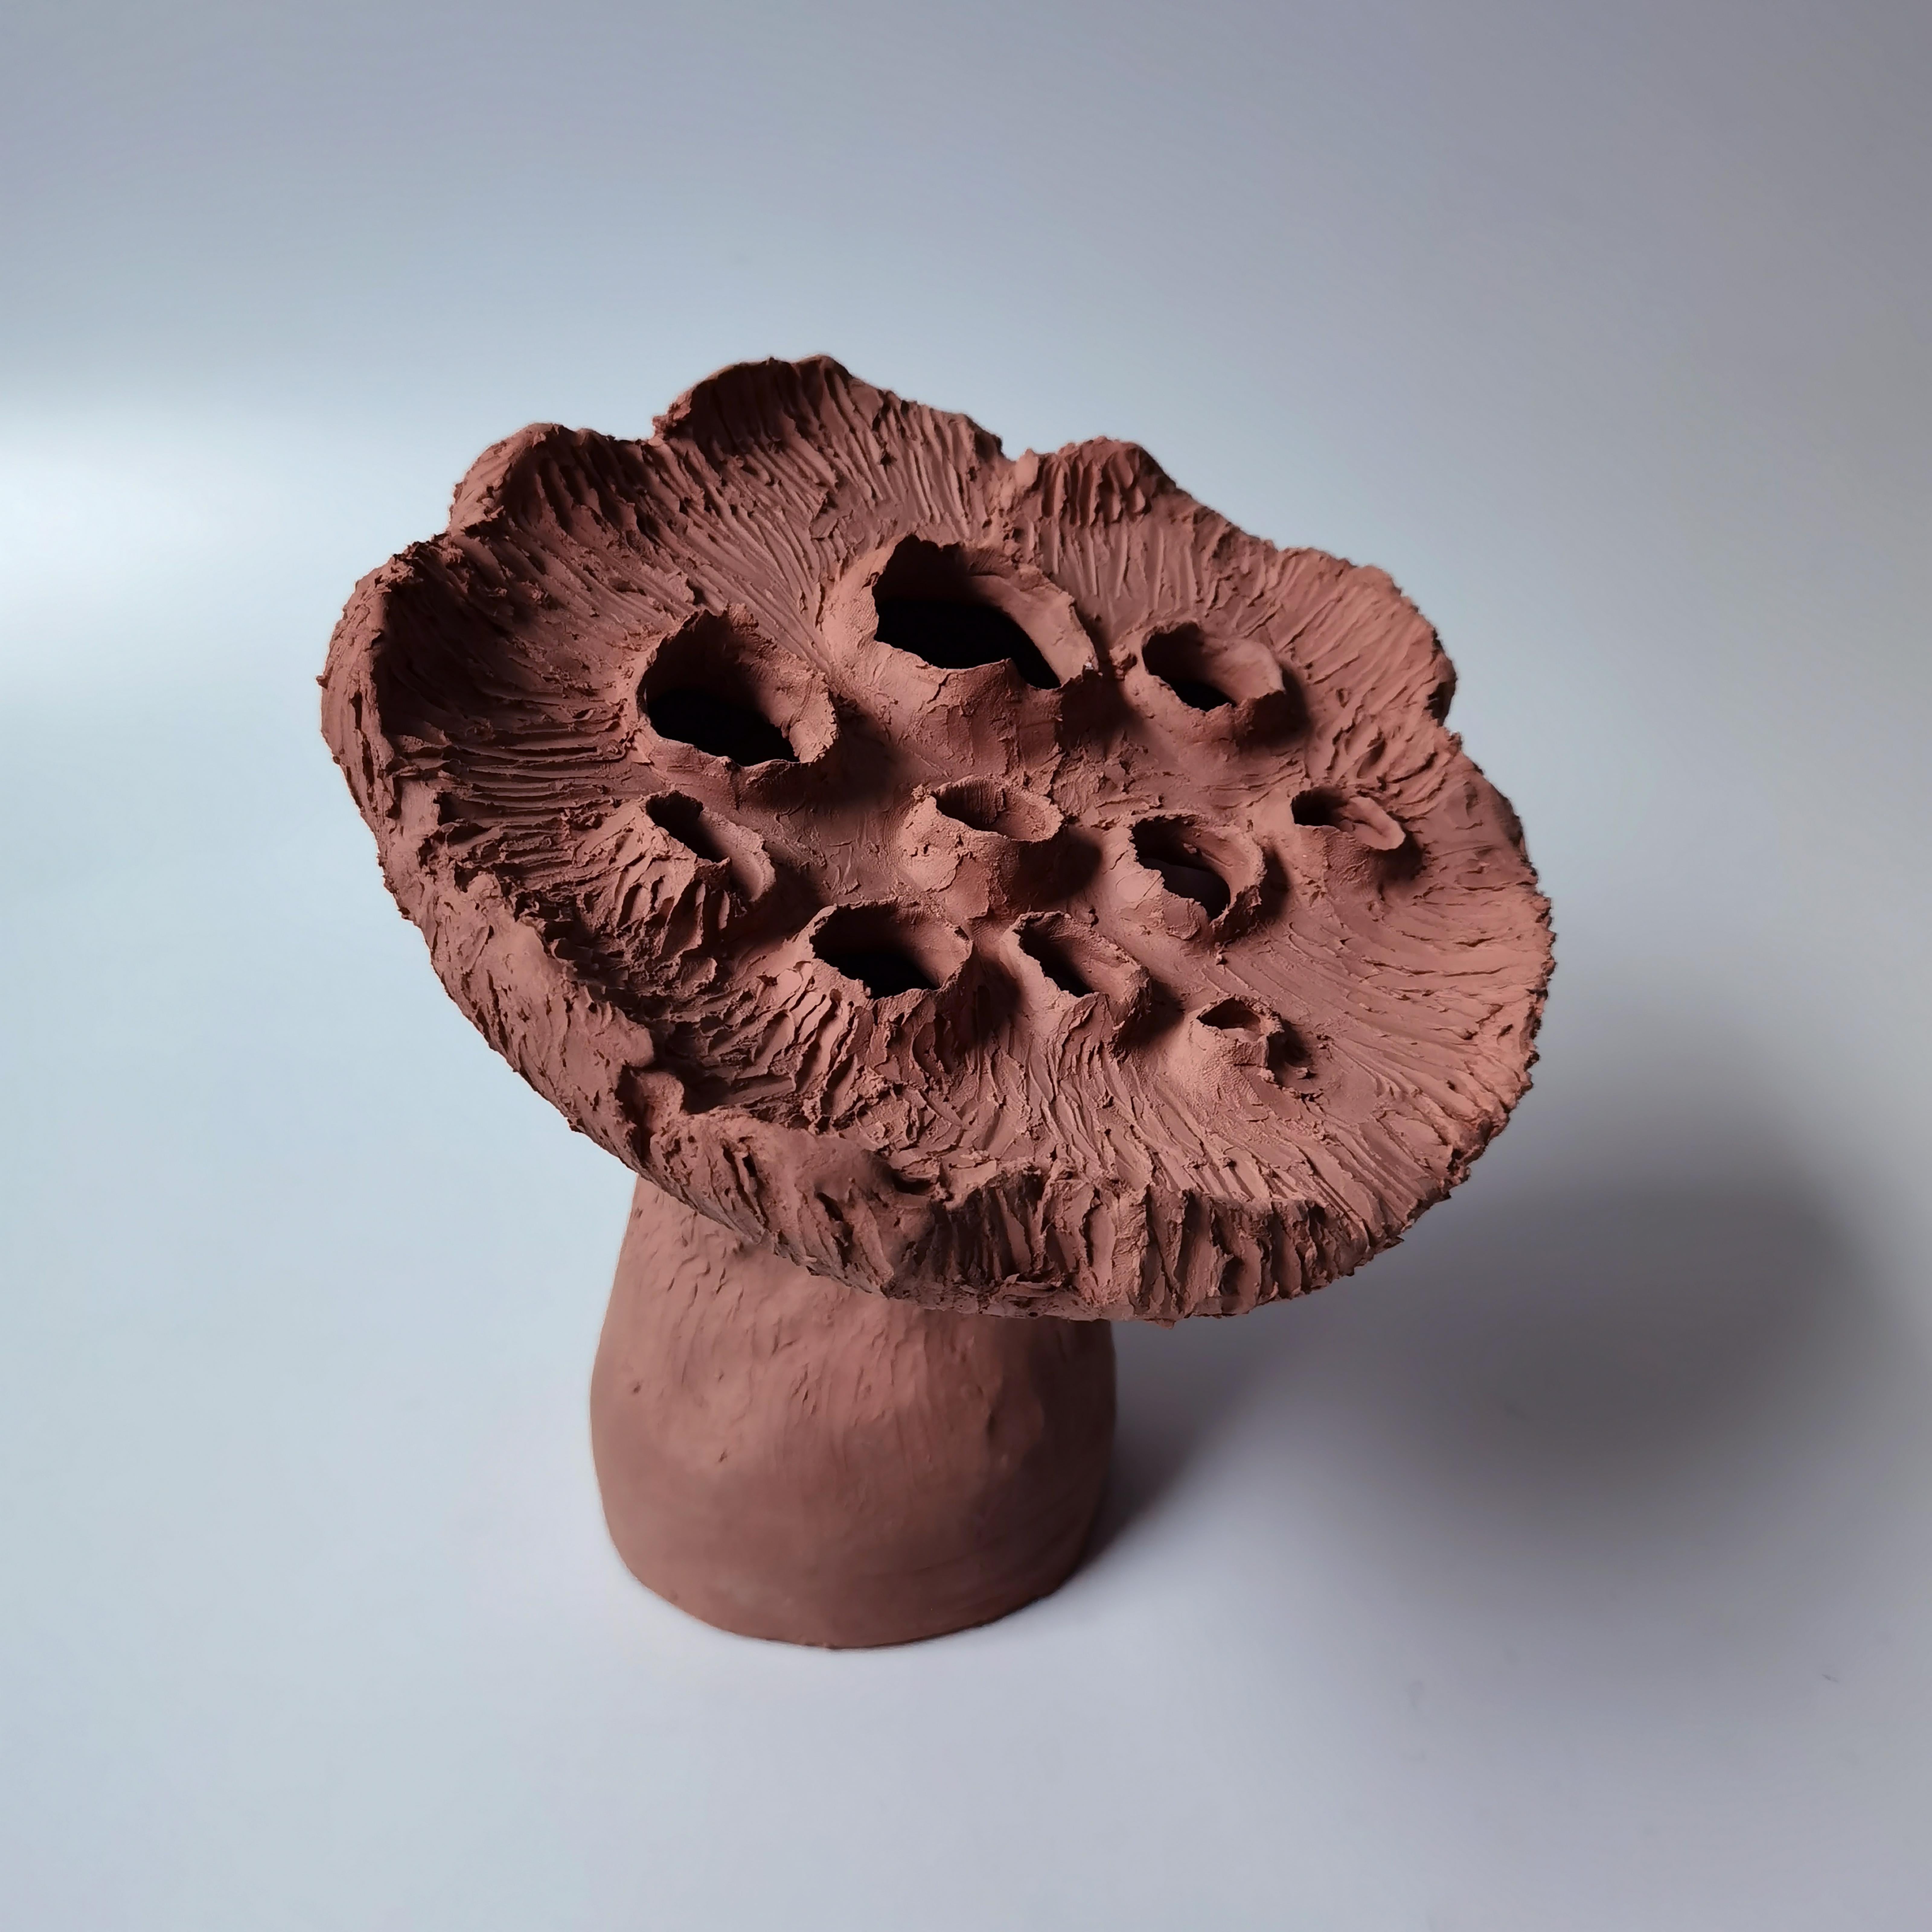 Terracotta lotus pod by Jan Ernst
Dimensions: H 20 cm
Materials: Terracotta

Jan Ernst’s work takes on an experimental approach, as he prefers making bespoke pieces by hand. His organic design stems from his
abstract understanding of form and